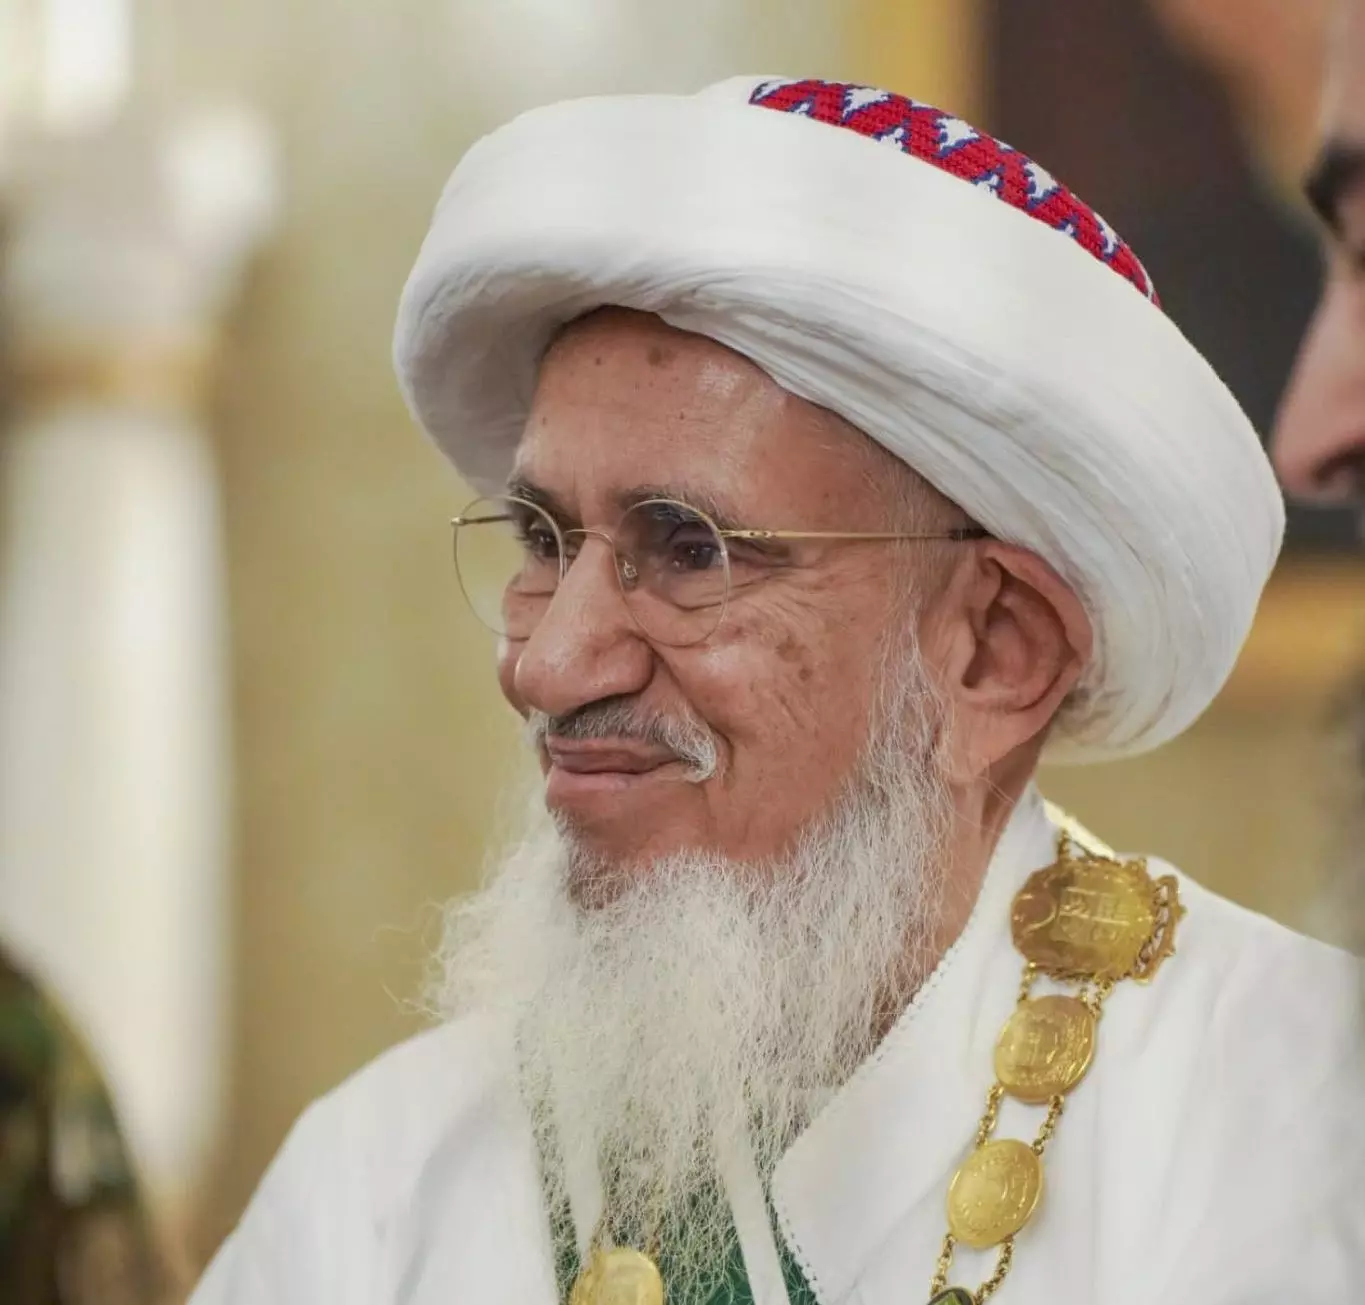 HC dismisses suit against appointment of Syedna Saifuddin as Dawoodi Bohra leader